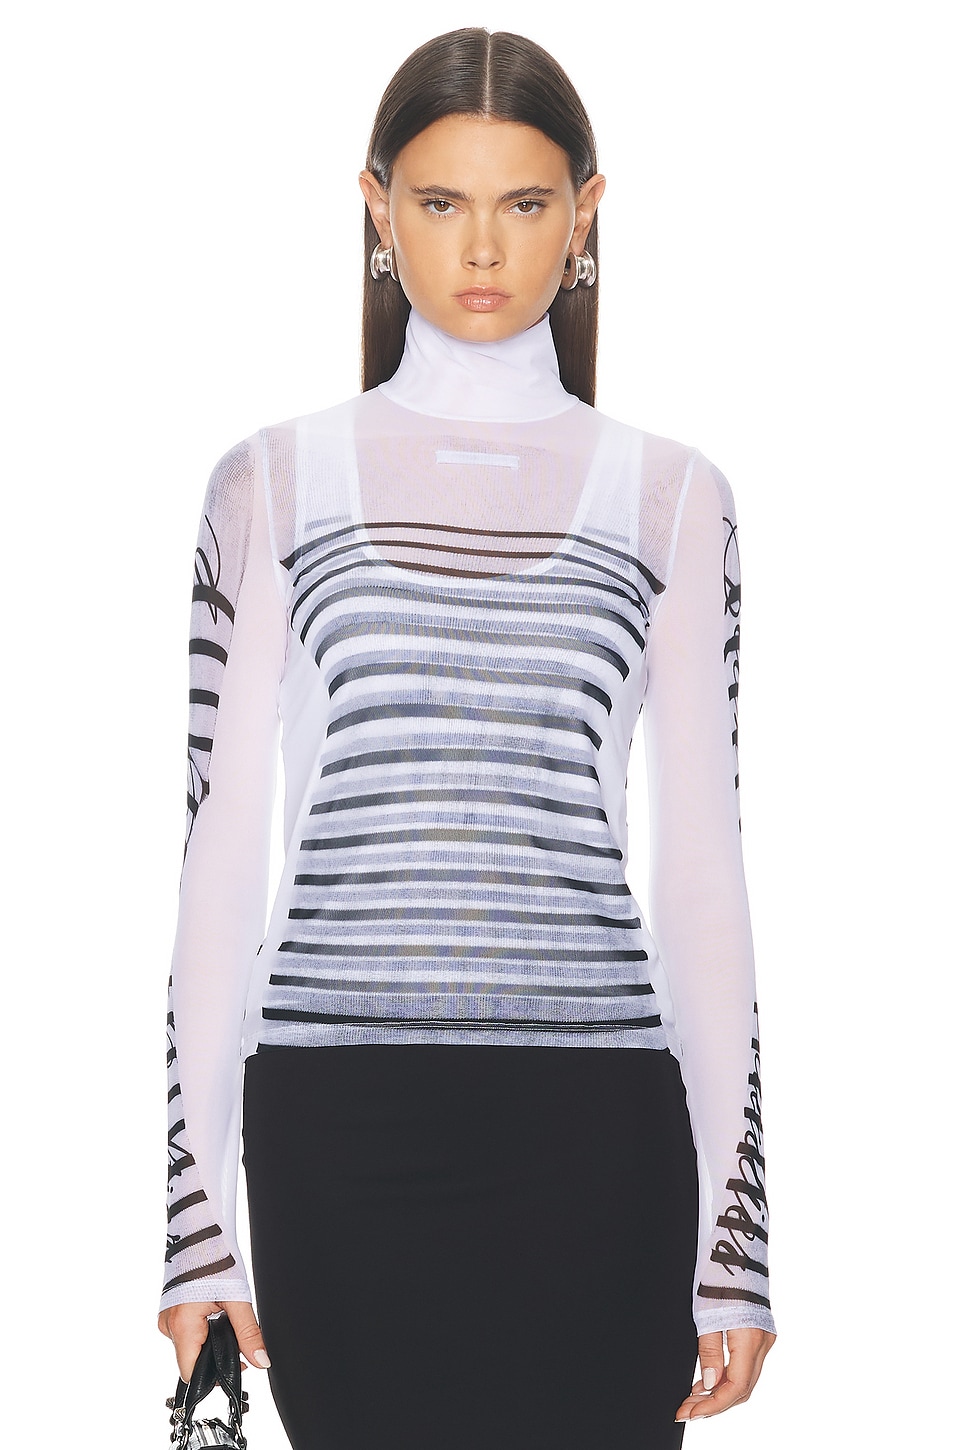 Image 1 of Jean Paul Gaultier Feathers Mariniere Printed Mesh Long Sleeve Top in White, Navy, & Black